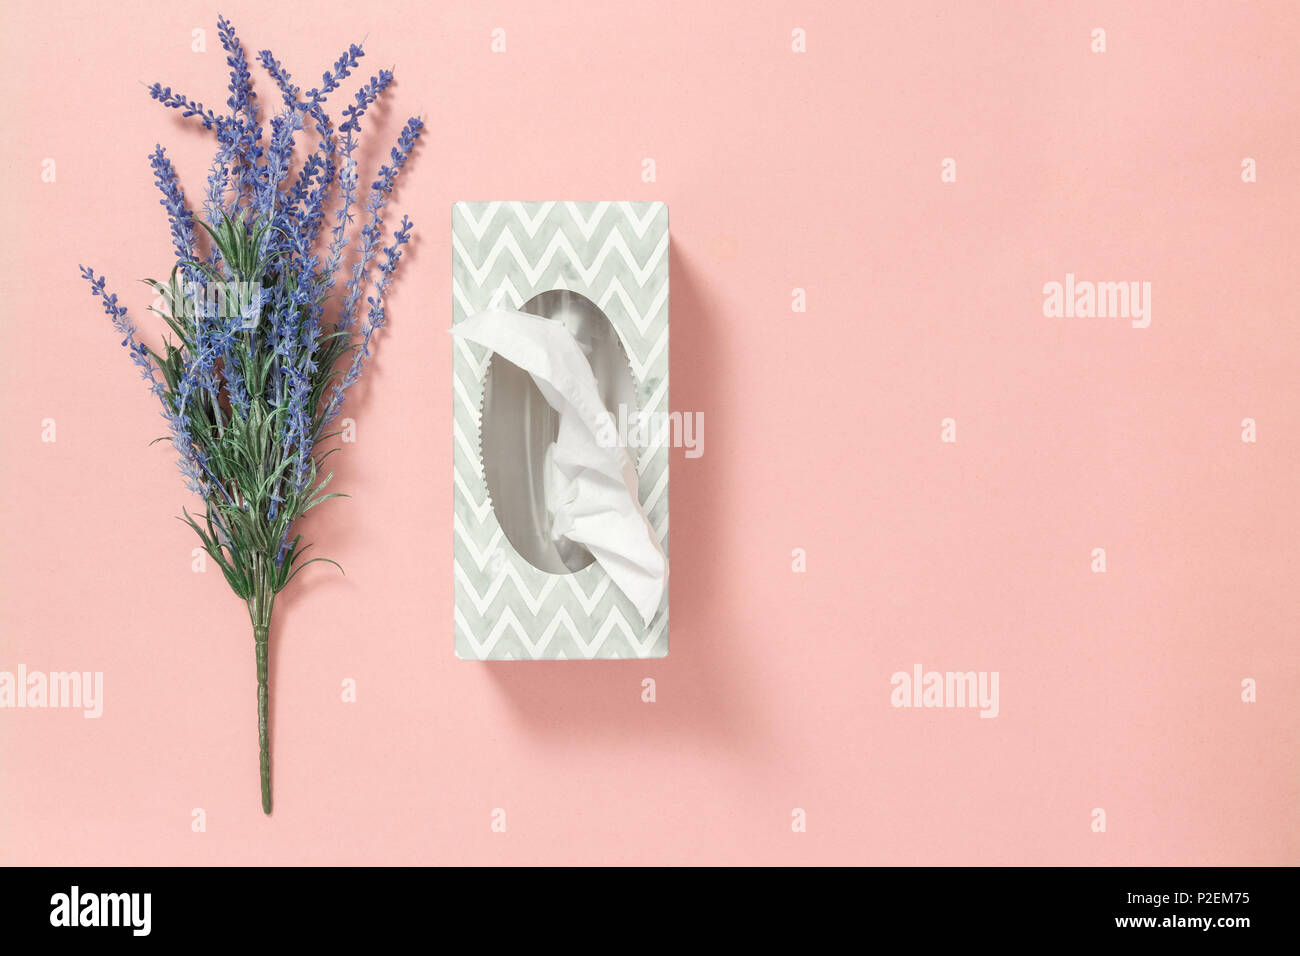 Gray tissue box and blue lavender on pastel pink background. Stock Photo